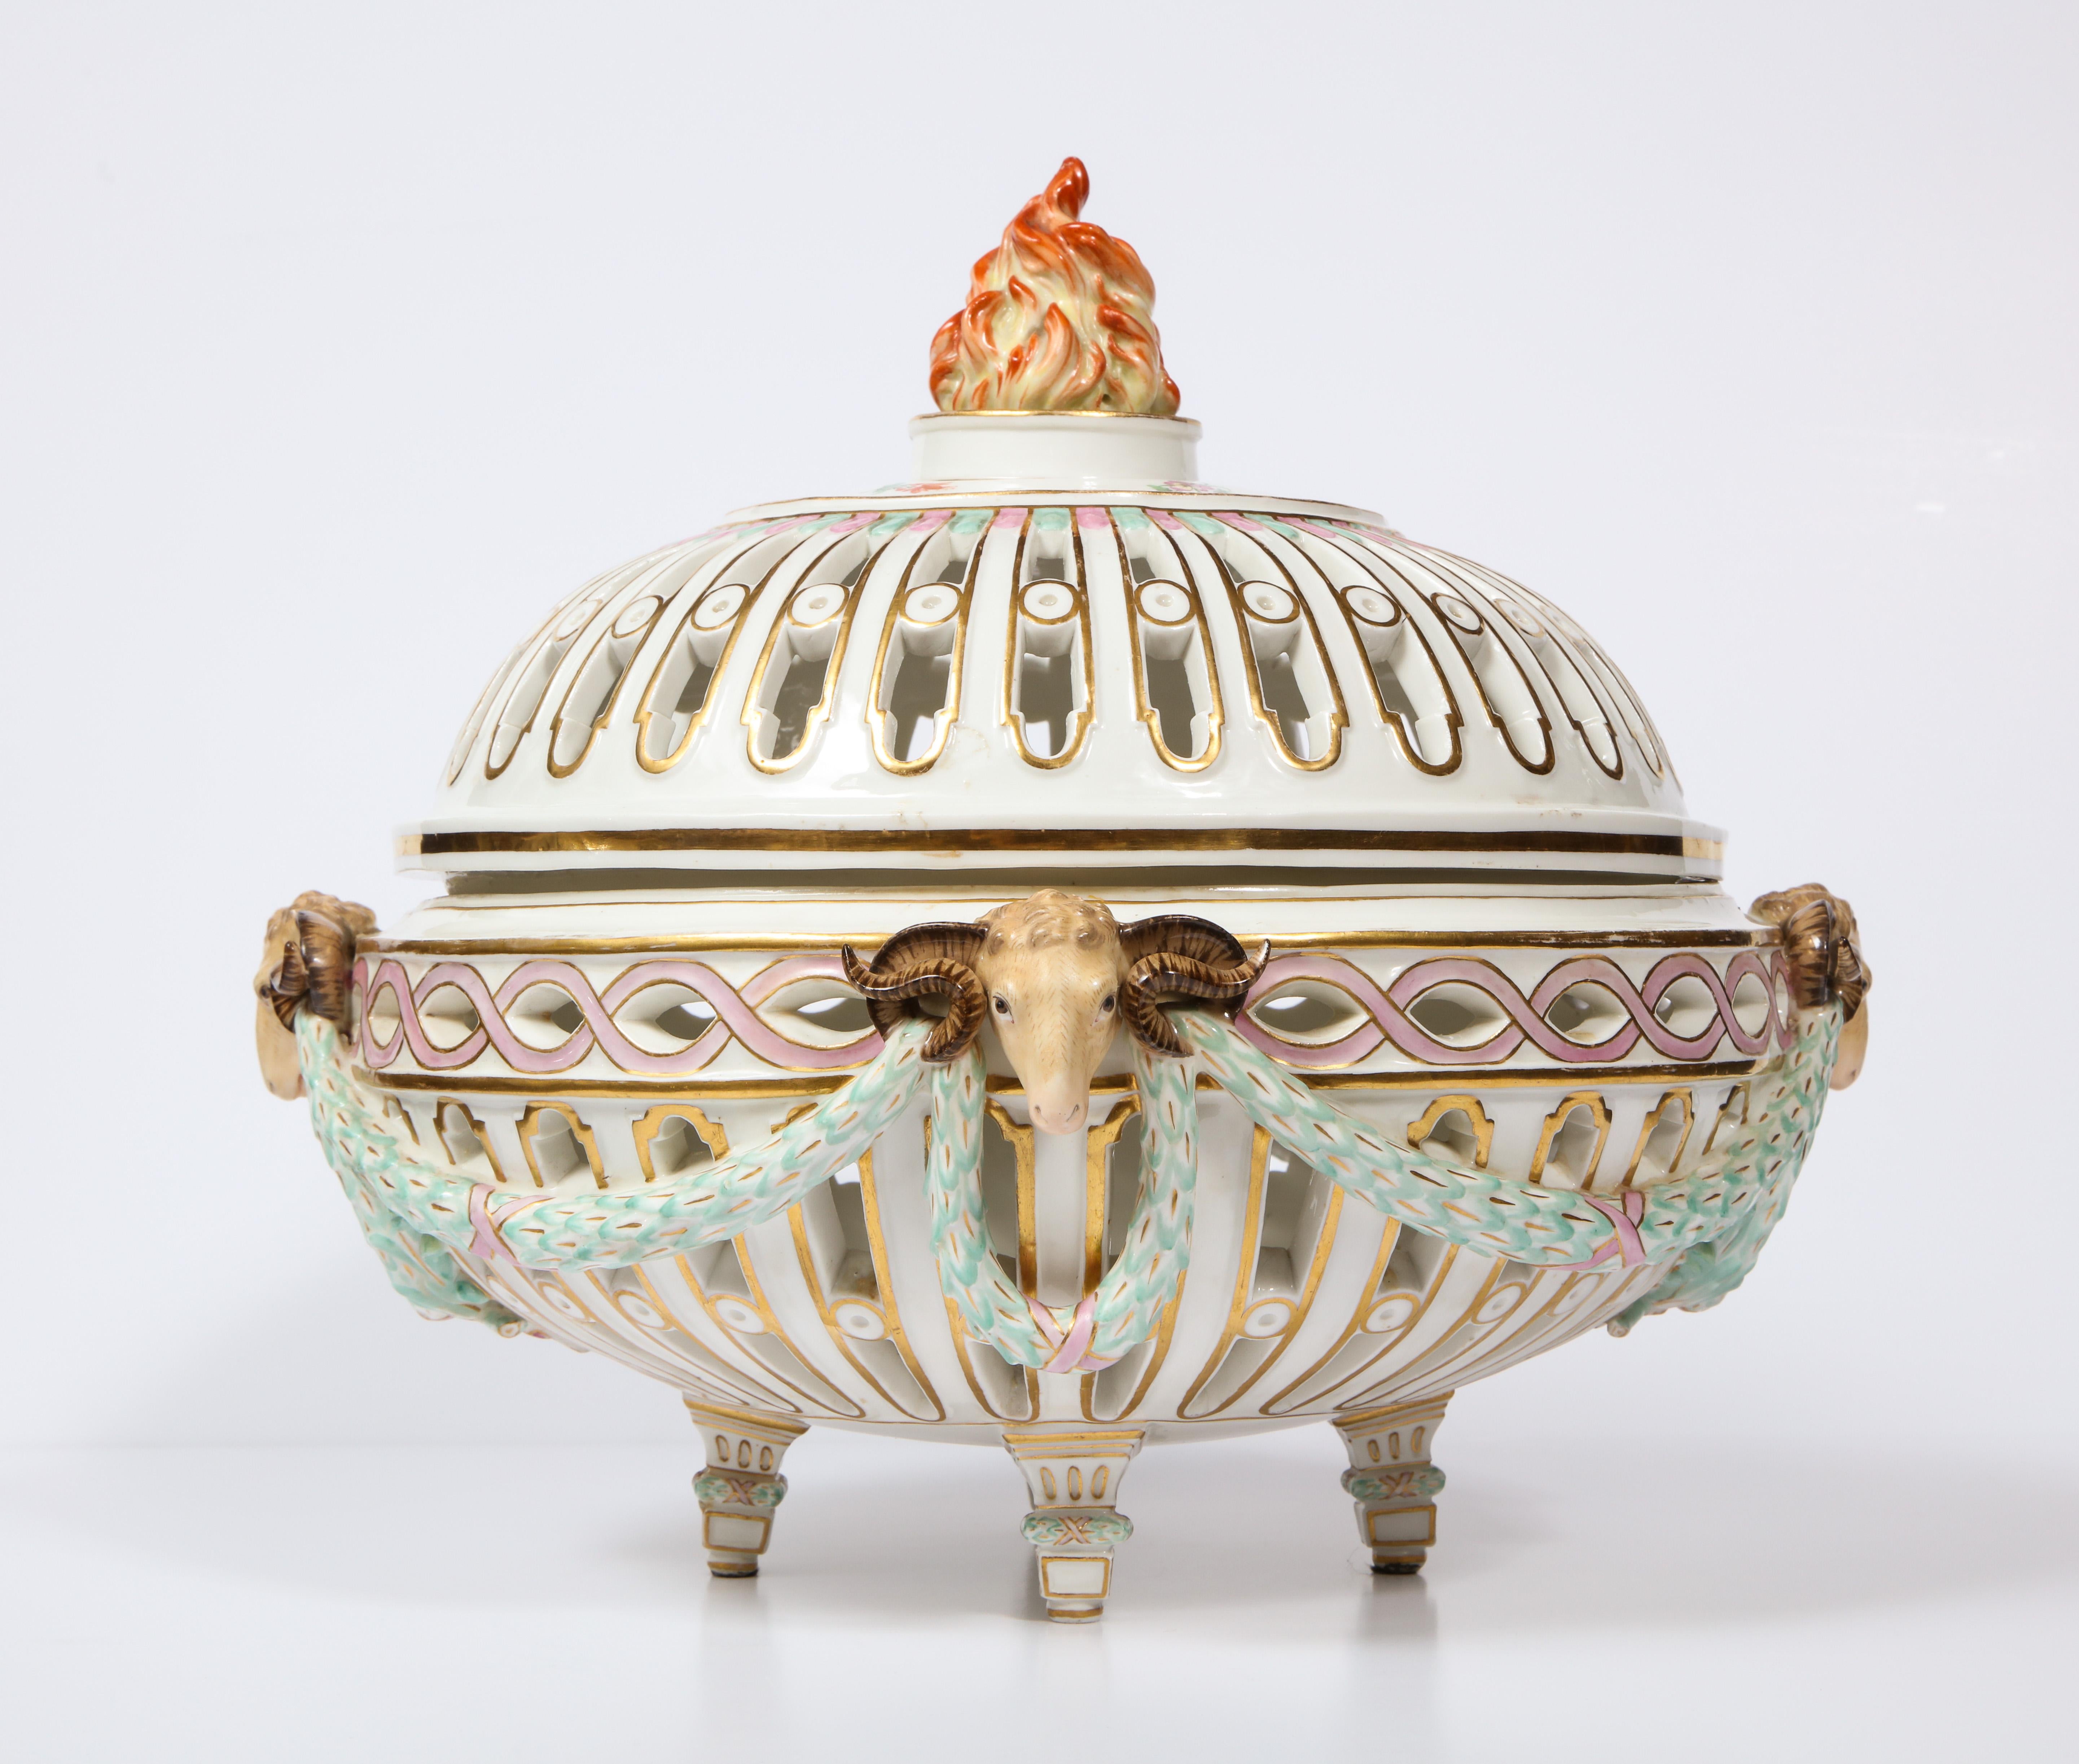 A large, beautiful, and rare 19th century neoclassical reticulated Meissen centerpiece with open filigree, rams heads, flaming finial, and love bird cartouches. This exquisite Meissen centerpiece was made in arguably the height of Meissen Porcelain